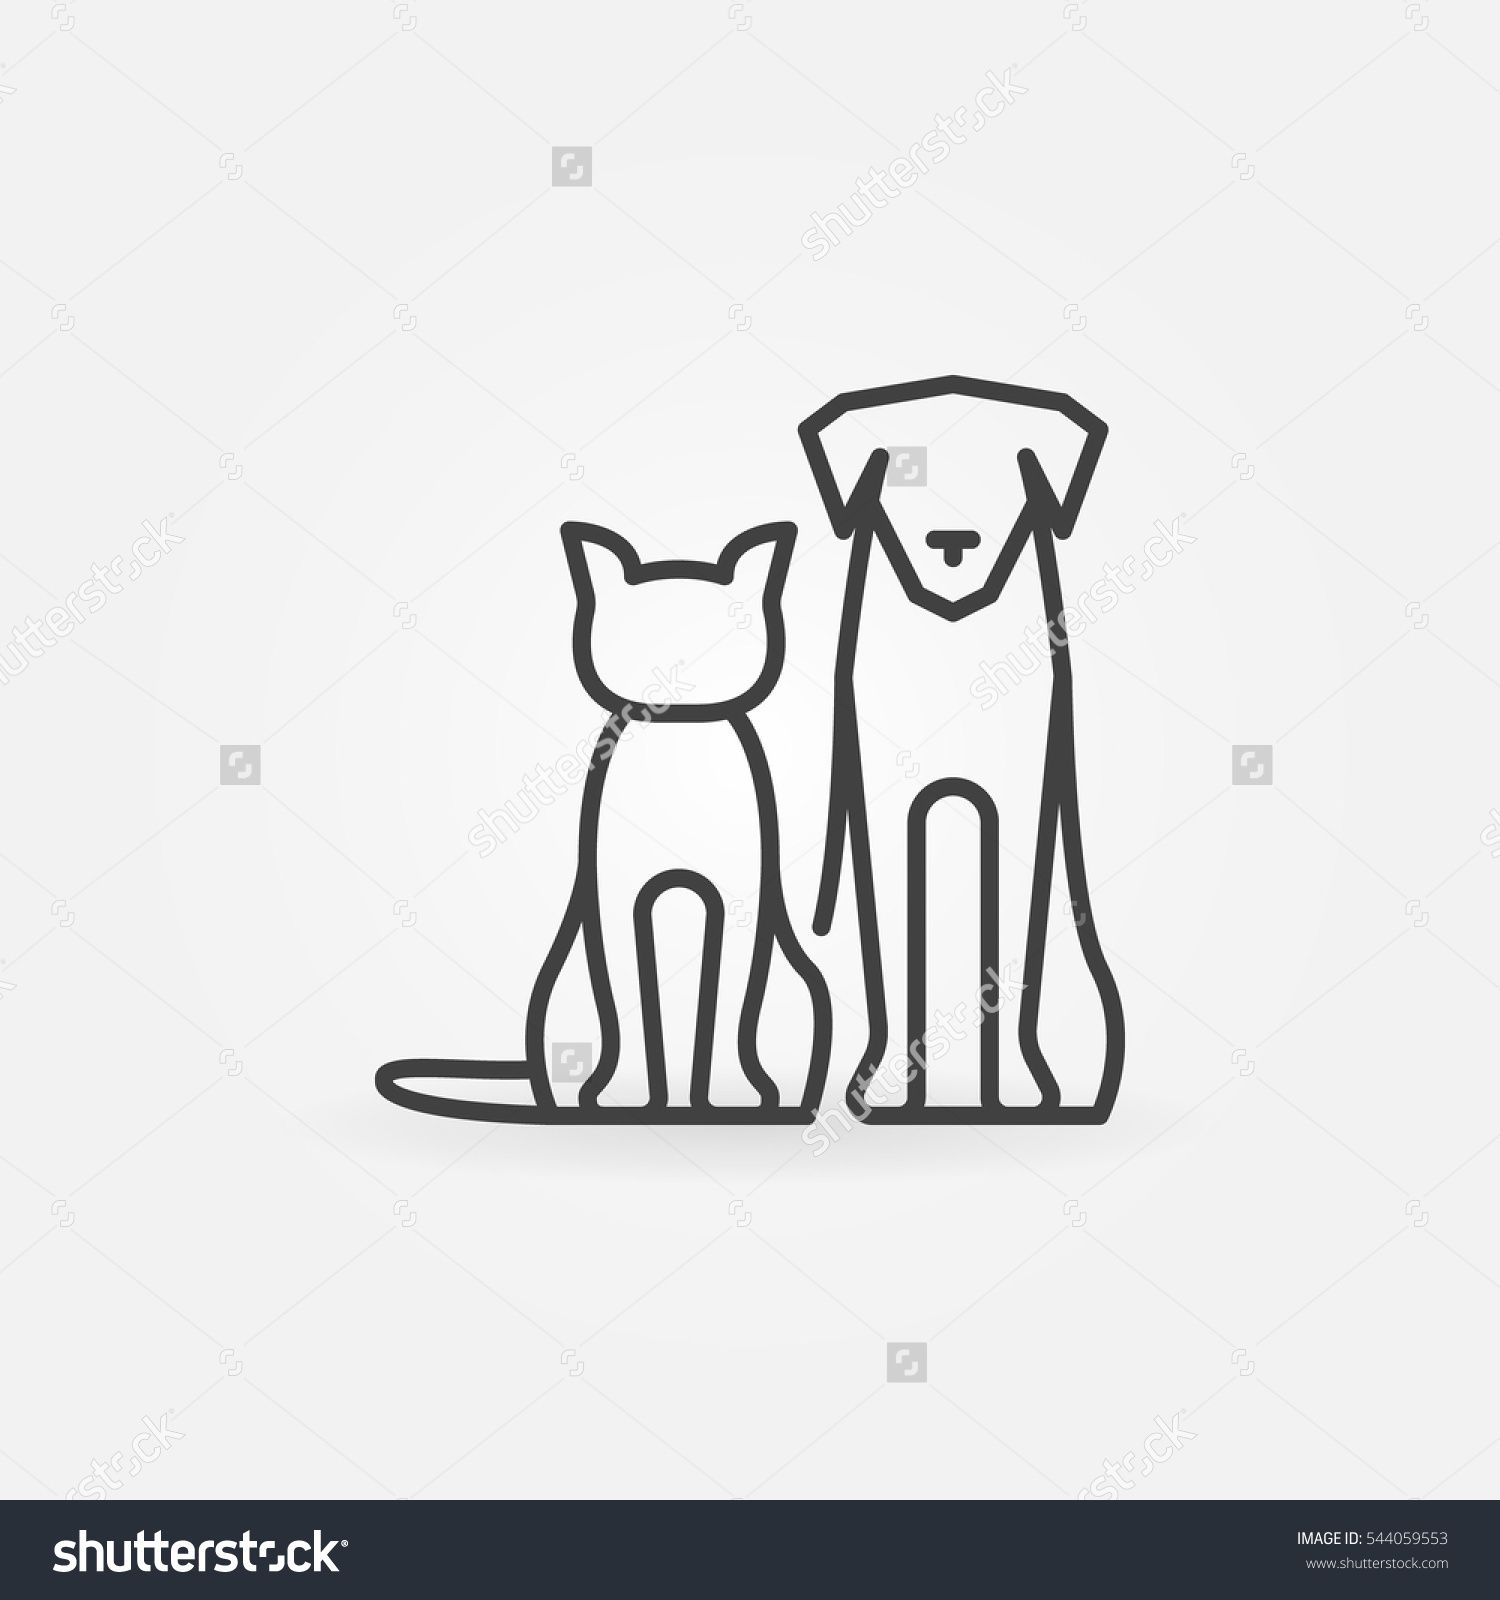 Cat with dog icon